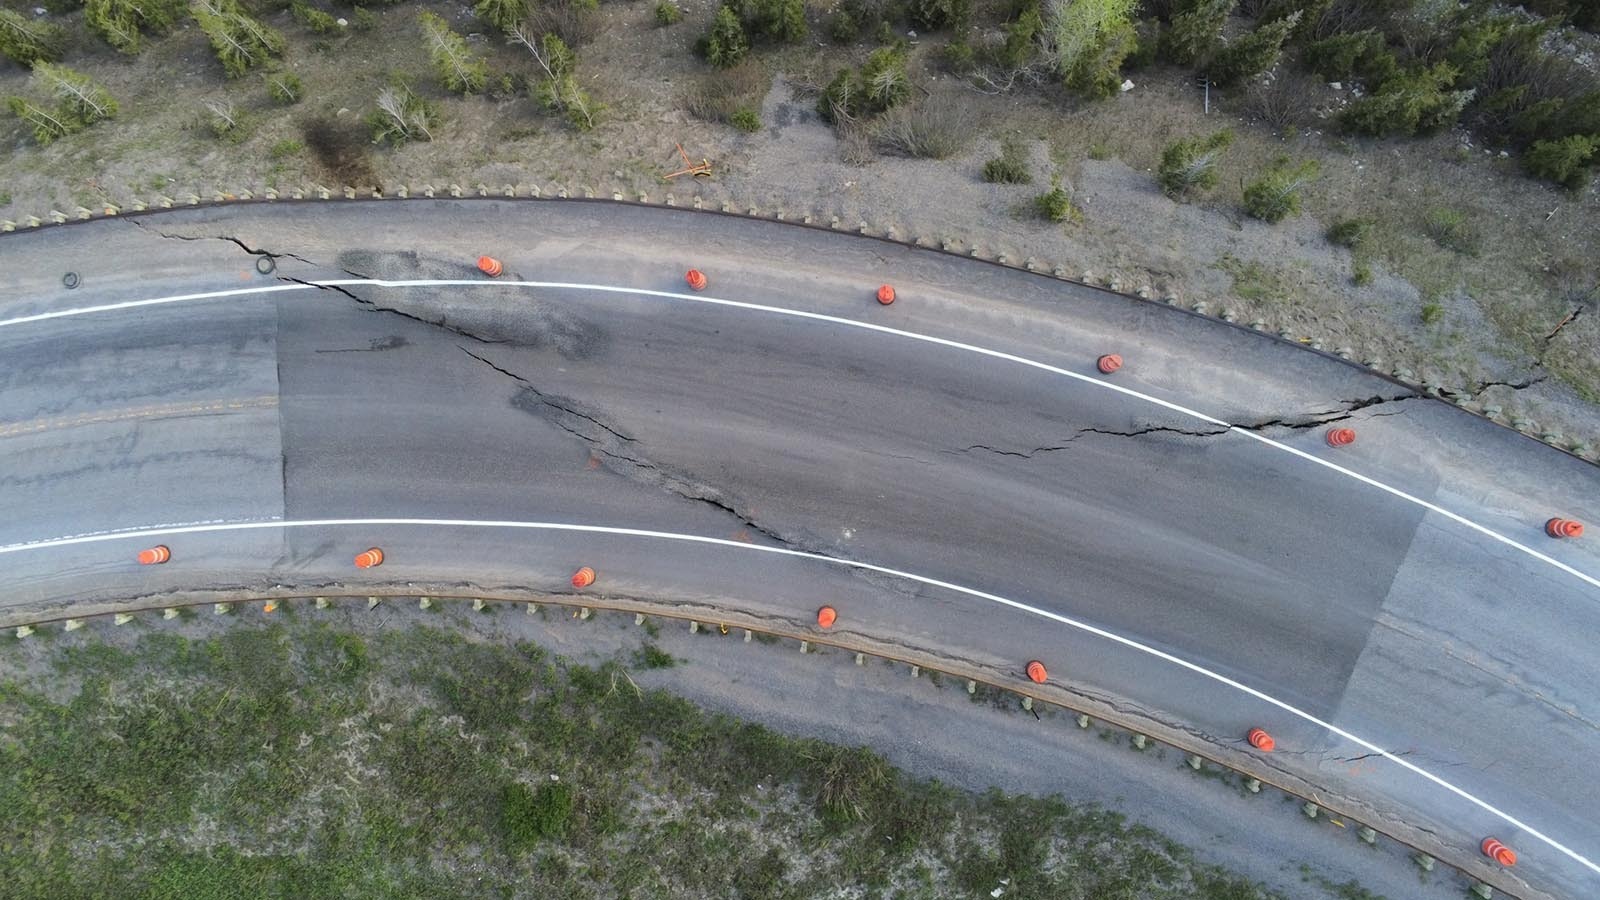 Cracks at milepost 12.8 signalled the beginning of the slip. The darker color of this section of road clearly show where previous patchwork was done.